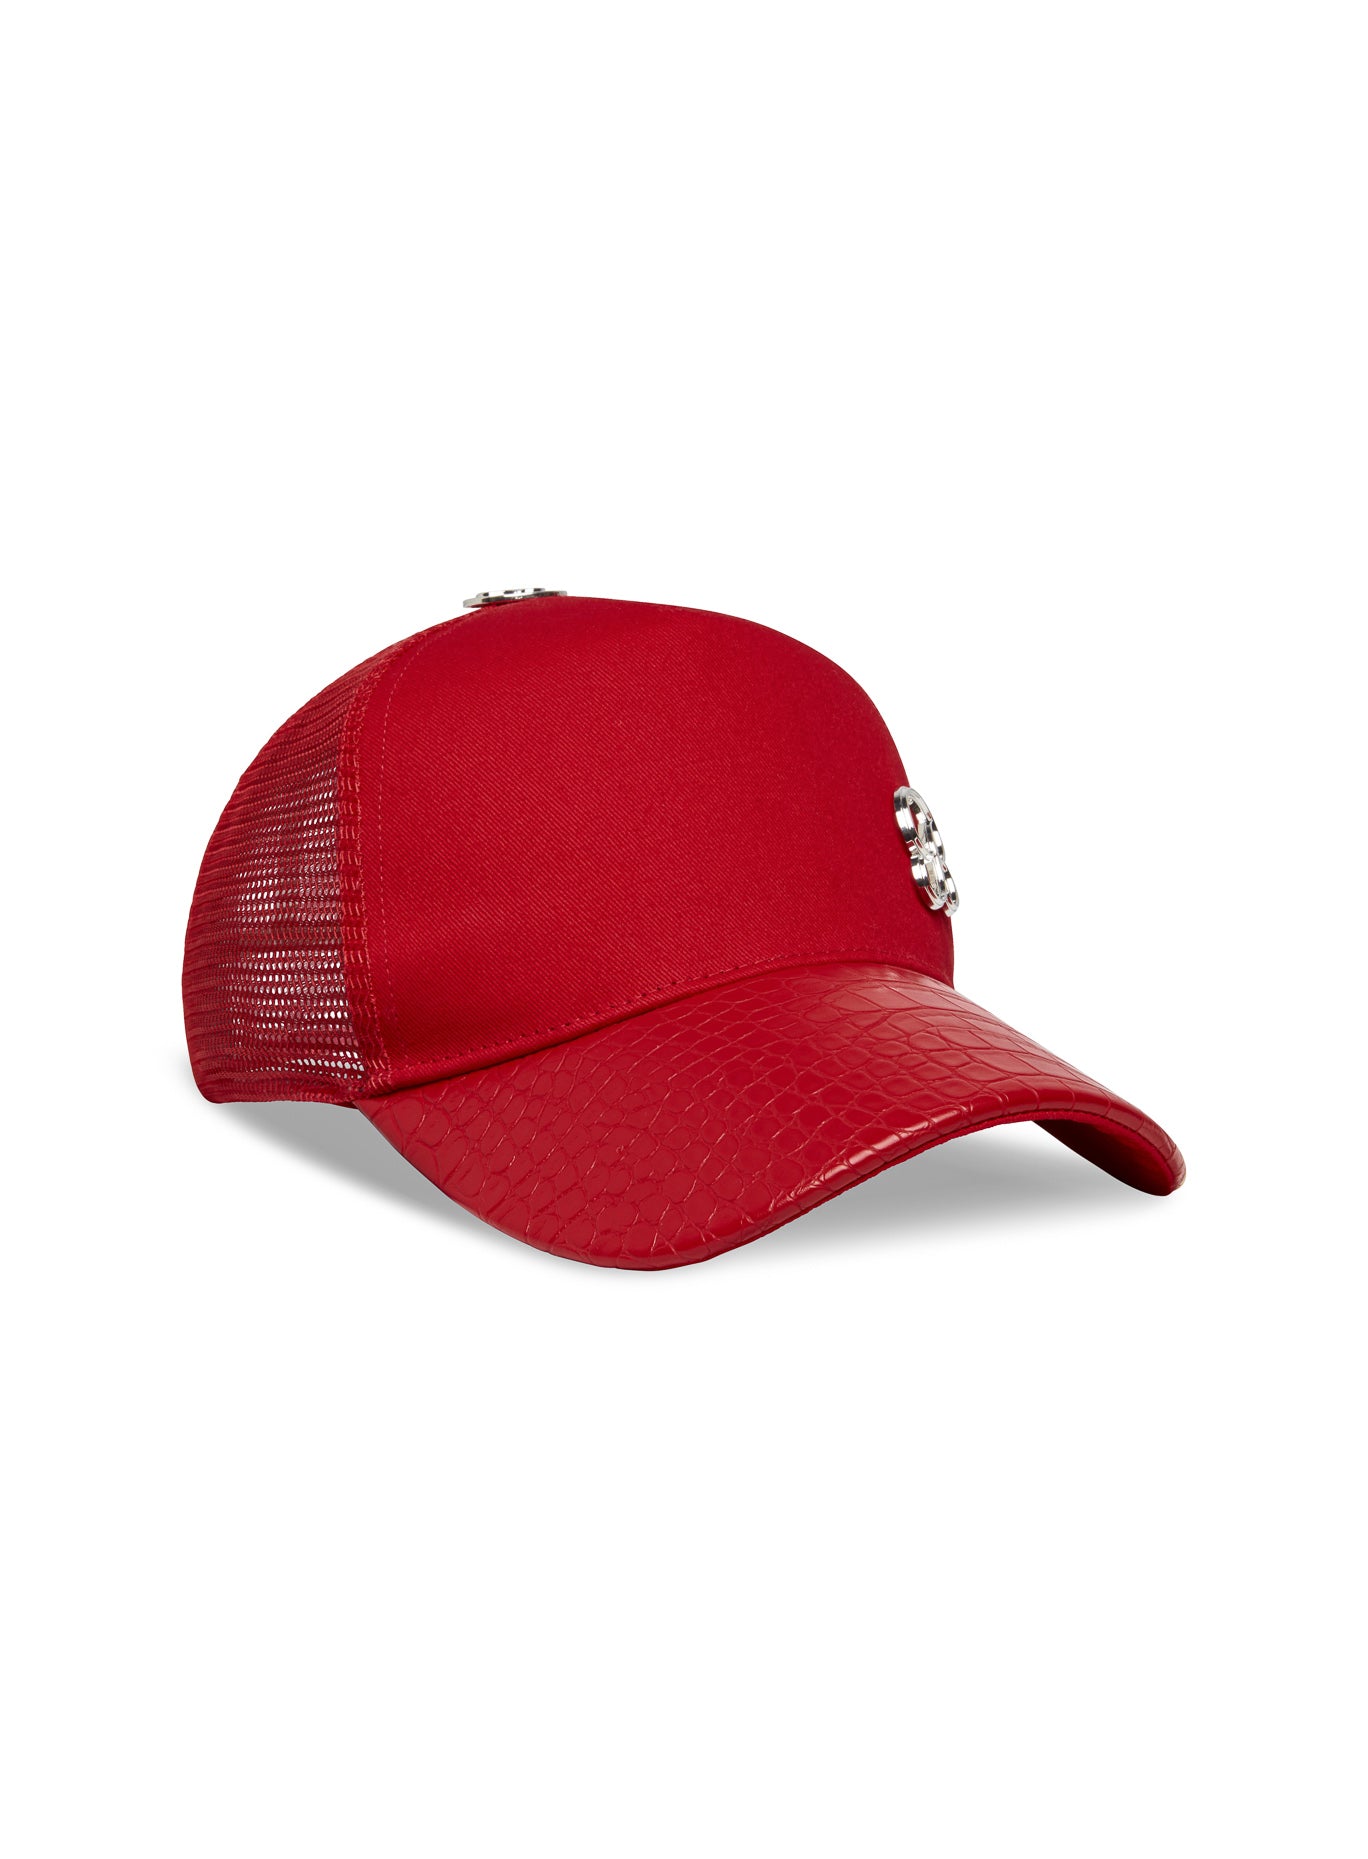 right side view of our red denim crocodile hat